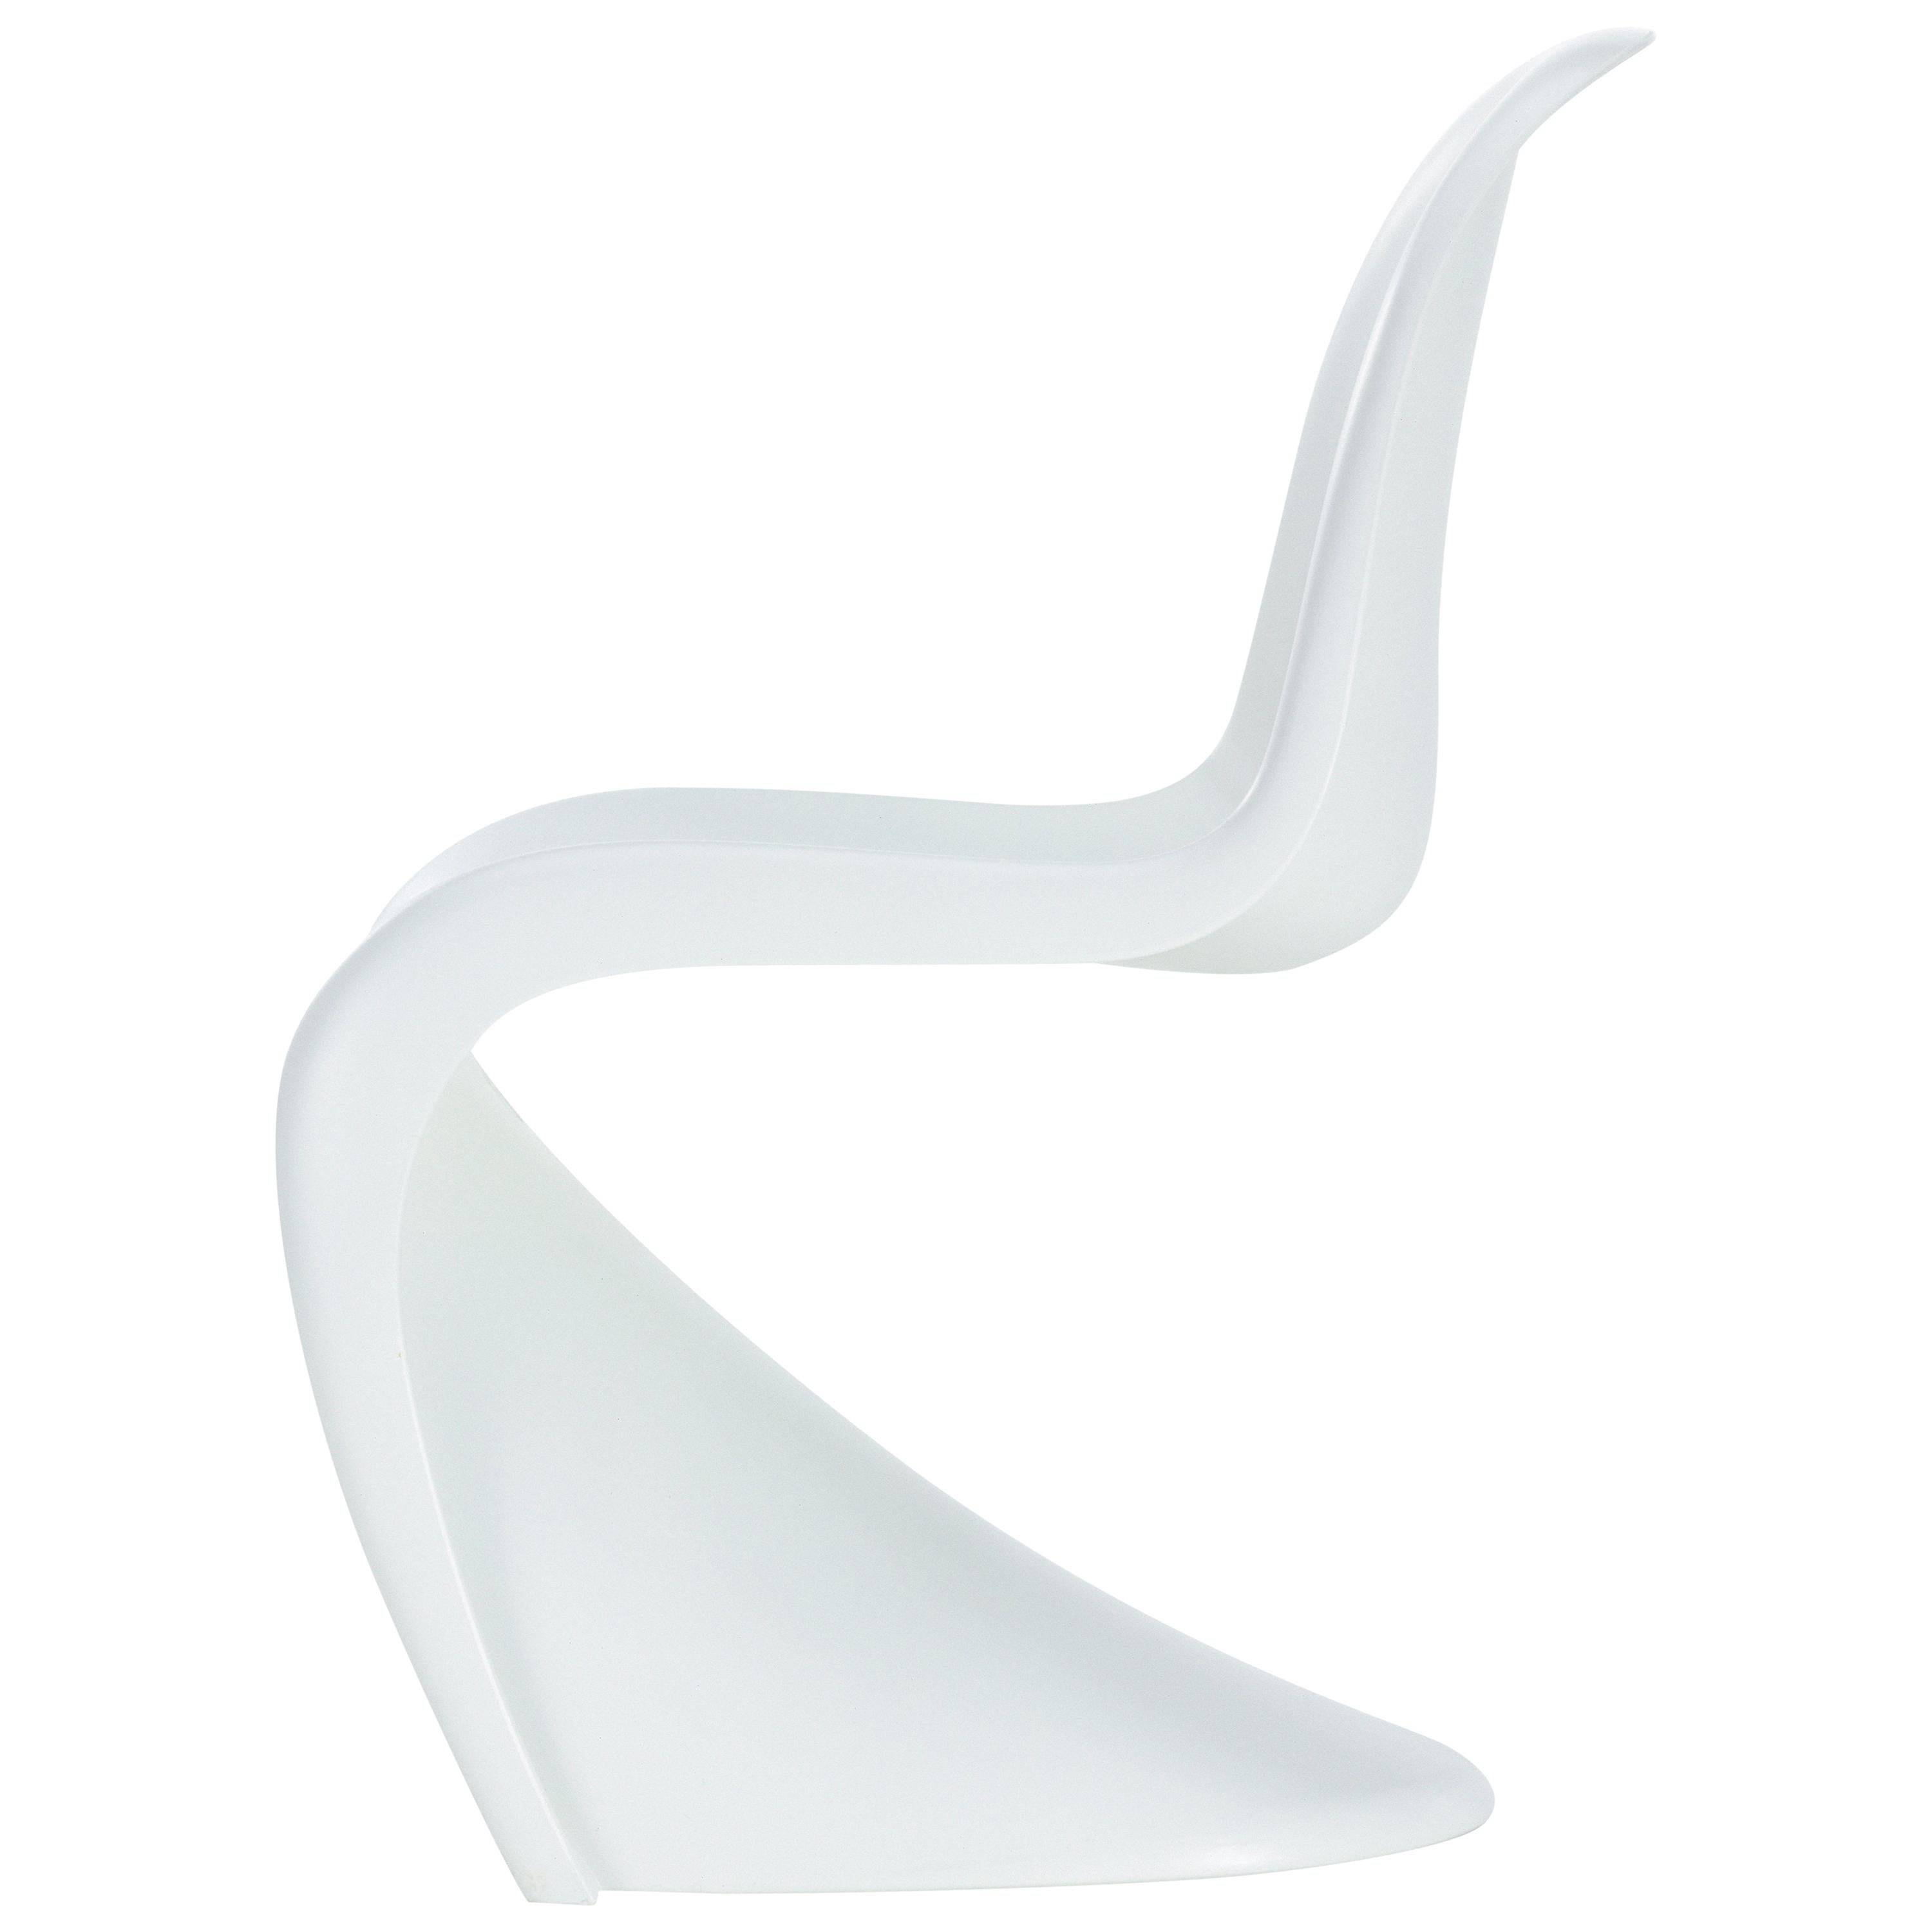 Vitra Panton Junior Chair in White by Verner Panton For Sale